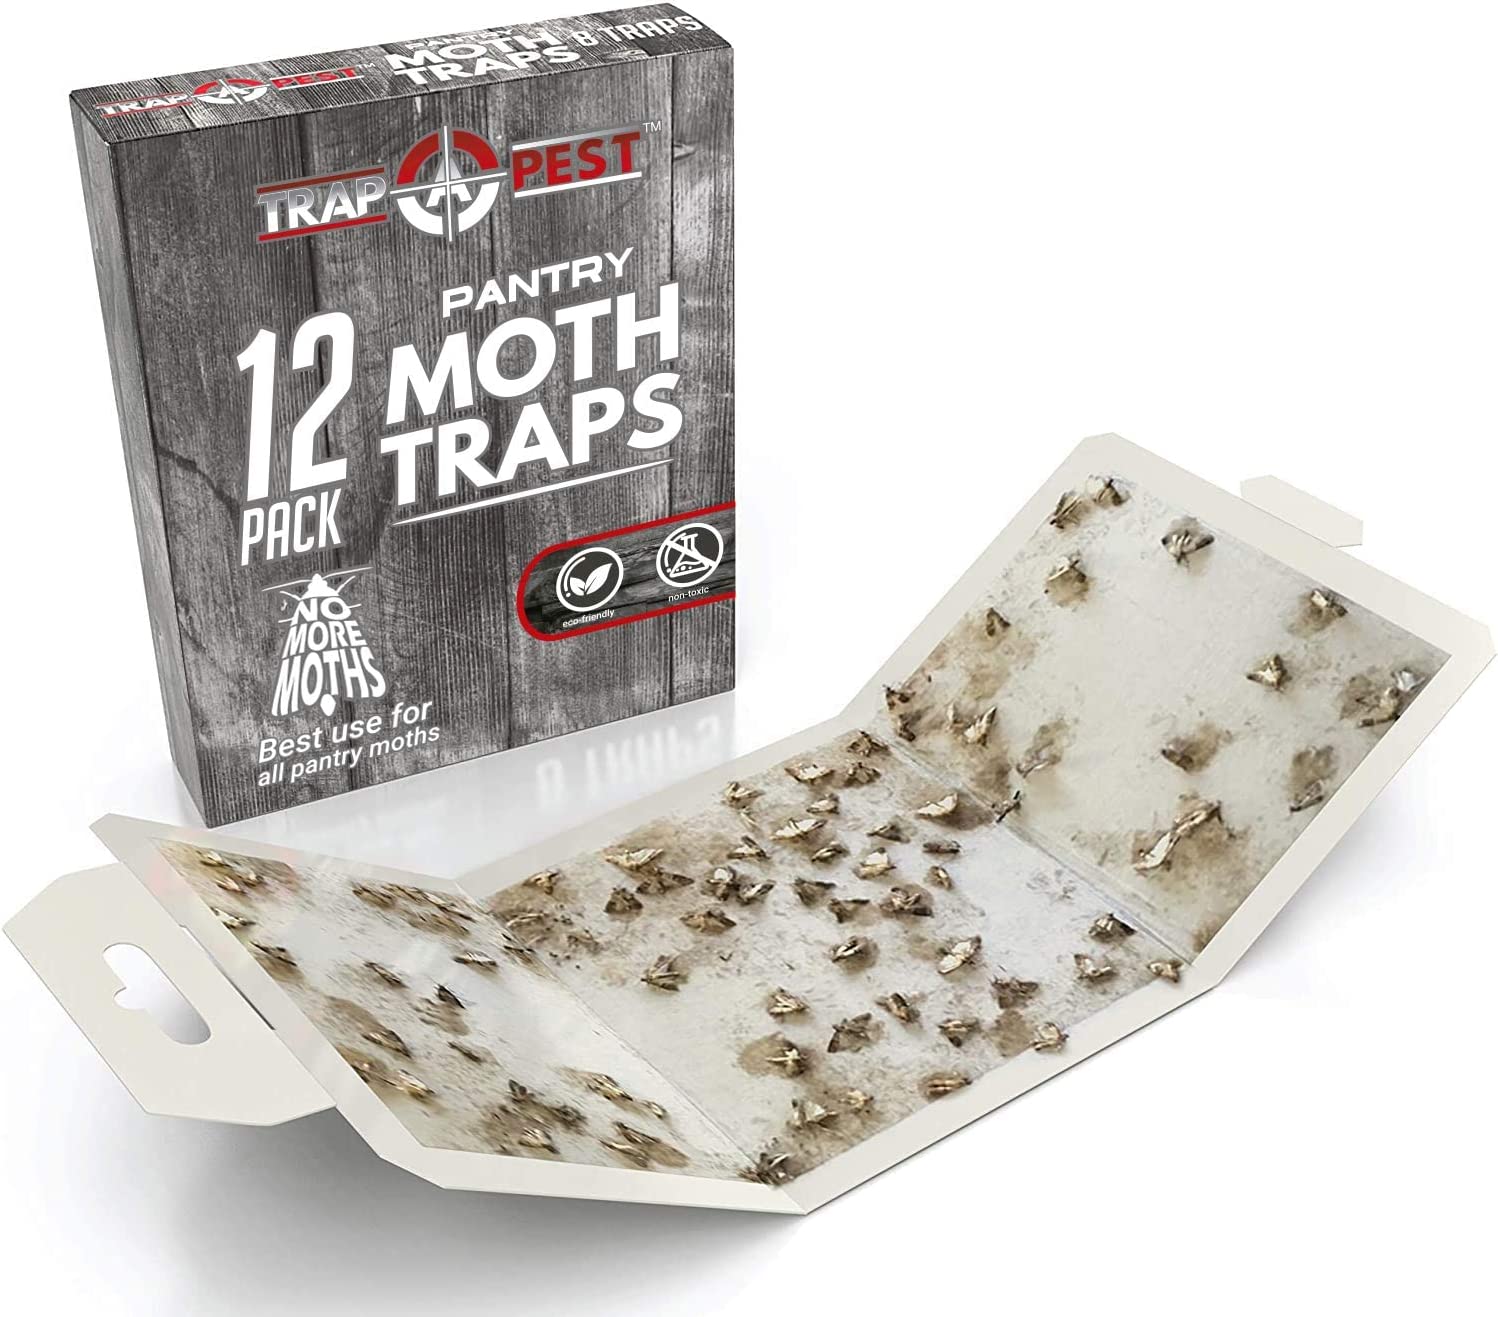 BugMD Pantry Pest Patrol (6 Count) - Moth Traps for Kitchen, Pantry Moth  Trap, Bug Trap, Moth Traps for House Pantry, Get Rid of Pantry Moth,  Kitchen